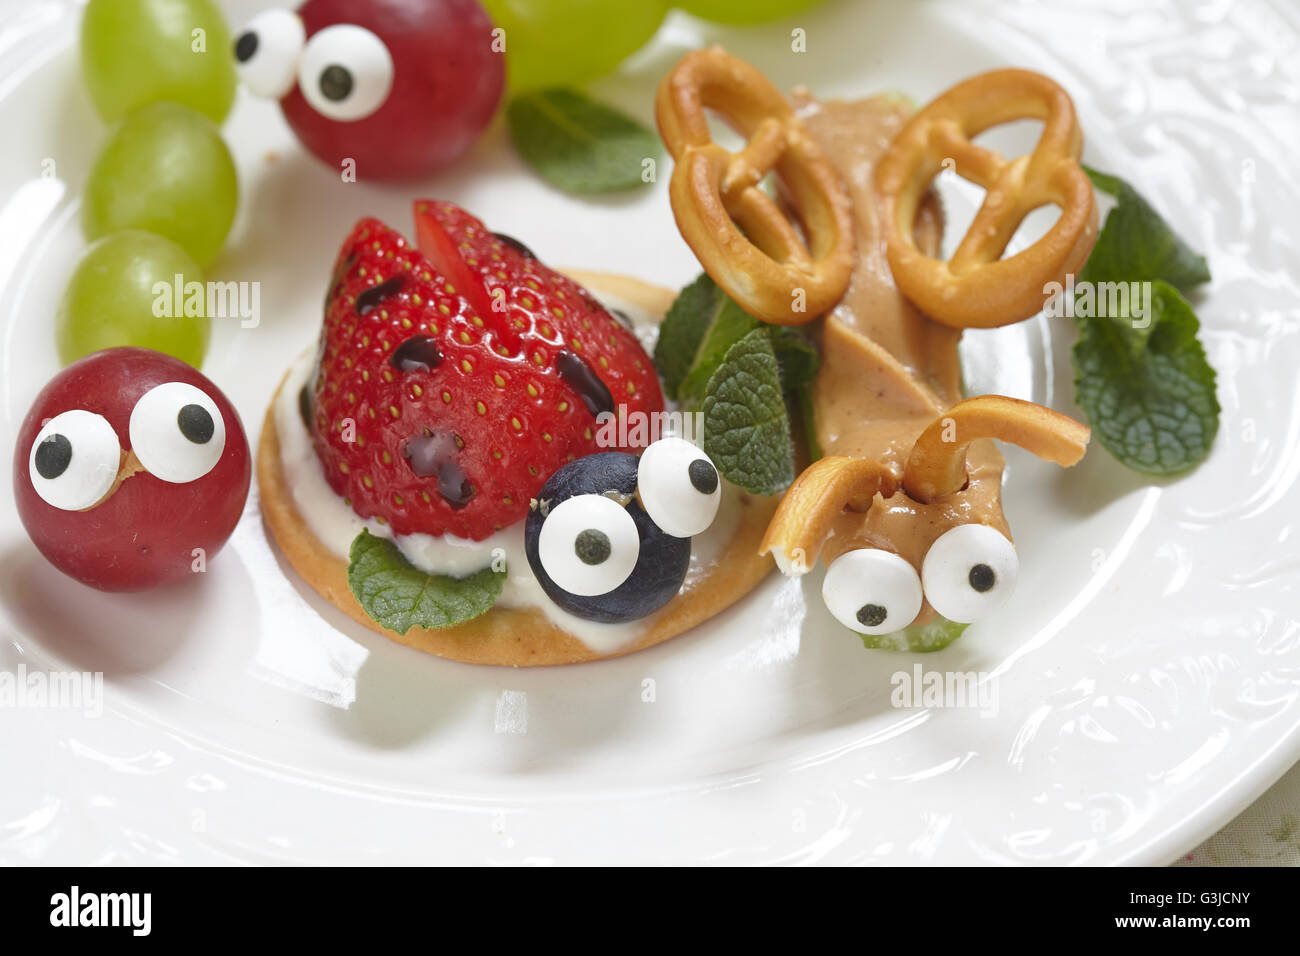 Funny beetles from grapes, berries and pretzels Stock Photo